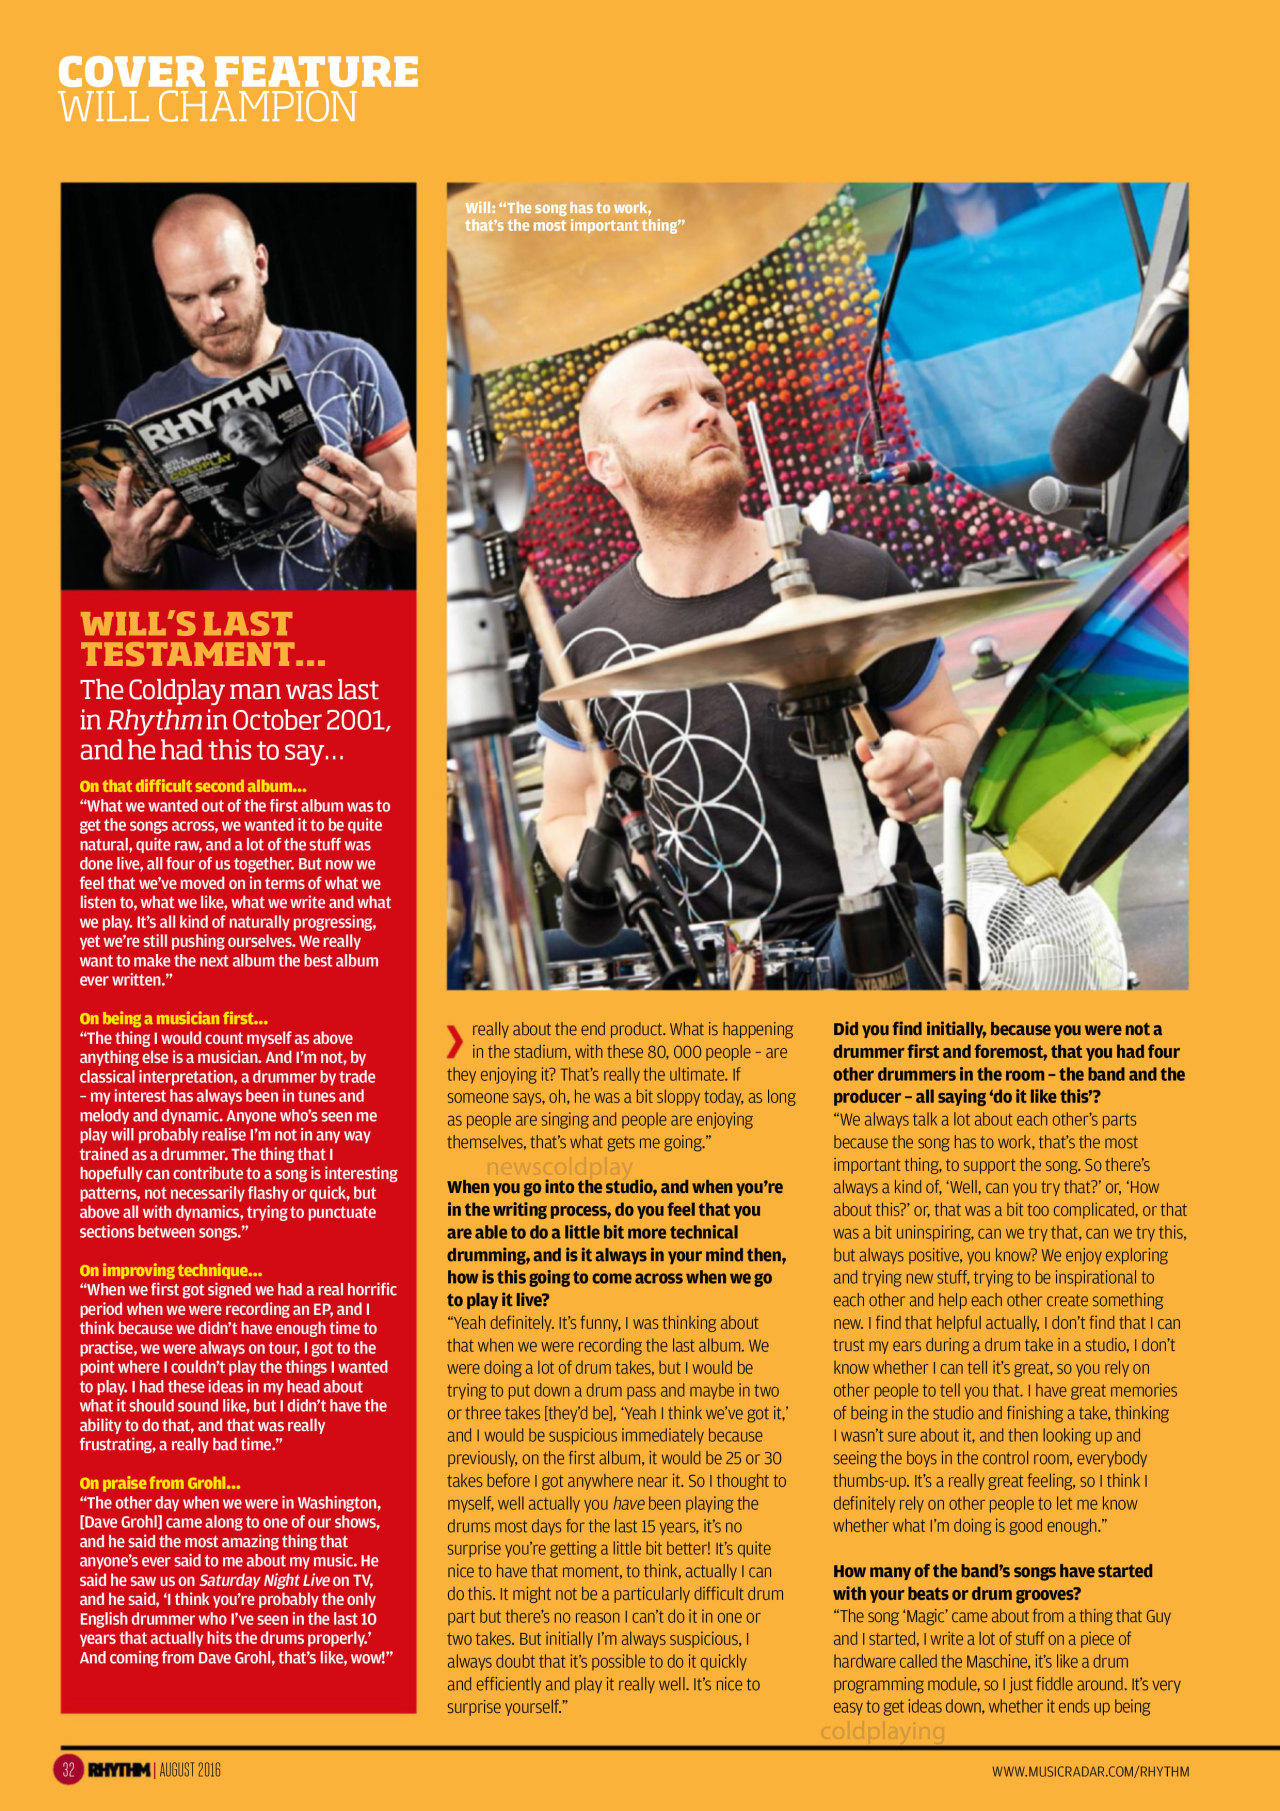 Will Champion: Just Right For Coldplay - DRUM! Magazine